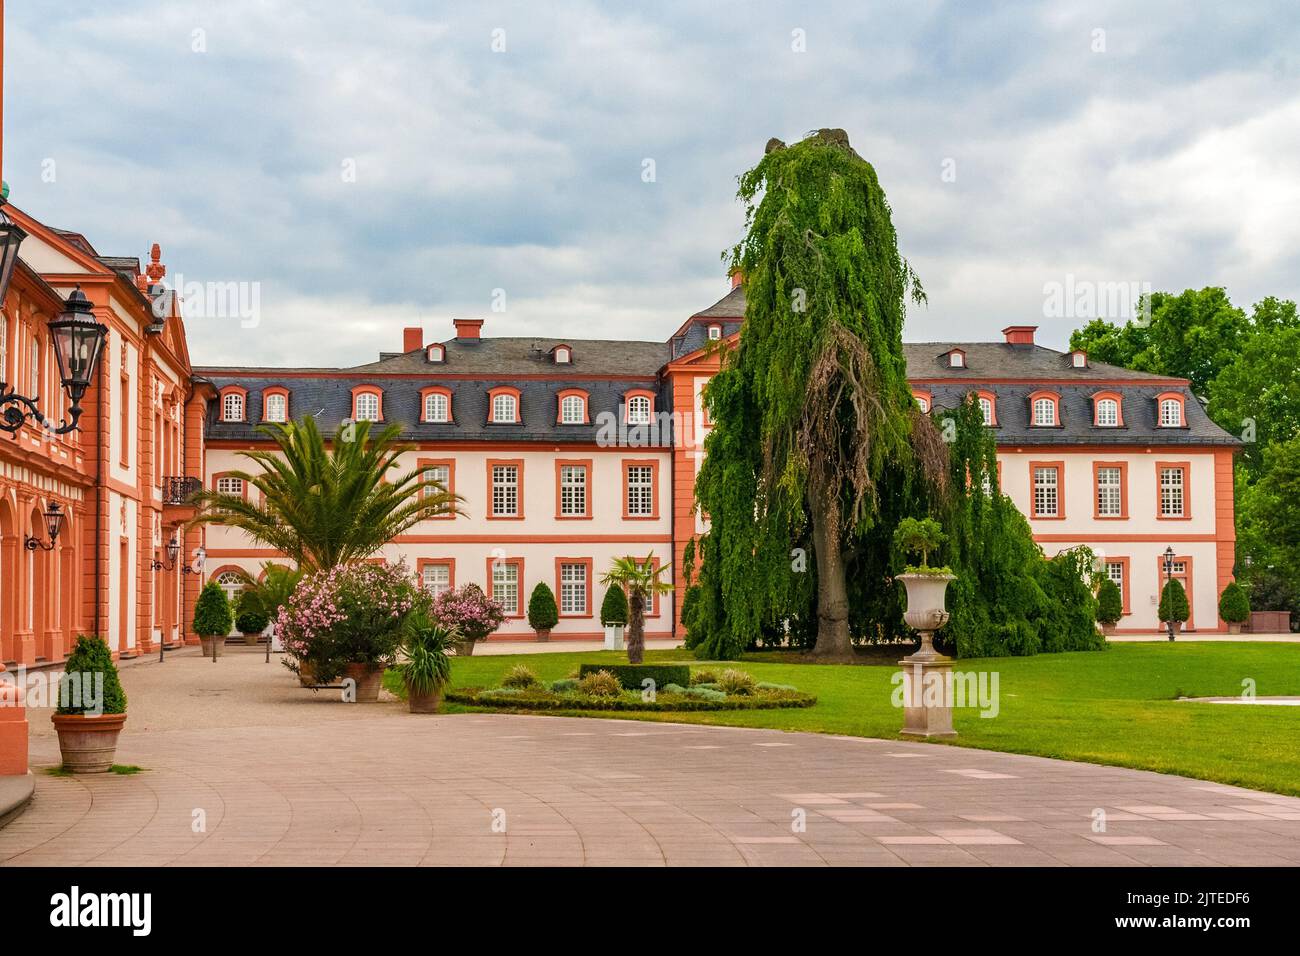 Lovely view of the flowers, the palm tree and the weeping beech in front of the west wing in the cour d'honneur of the famous Biebrich Palace in... Stock Photo